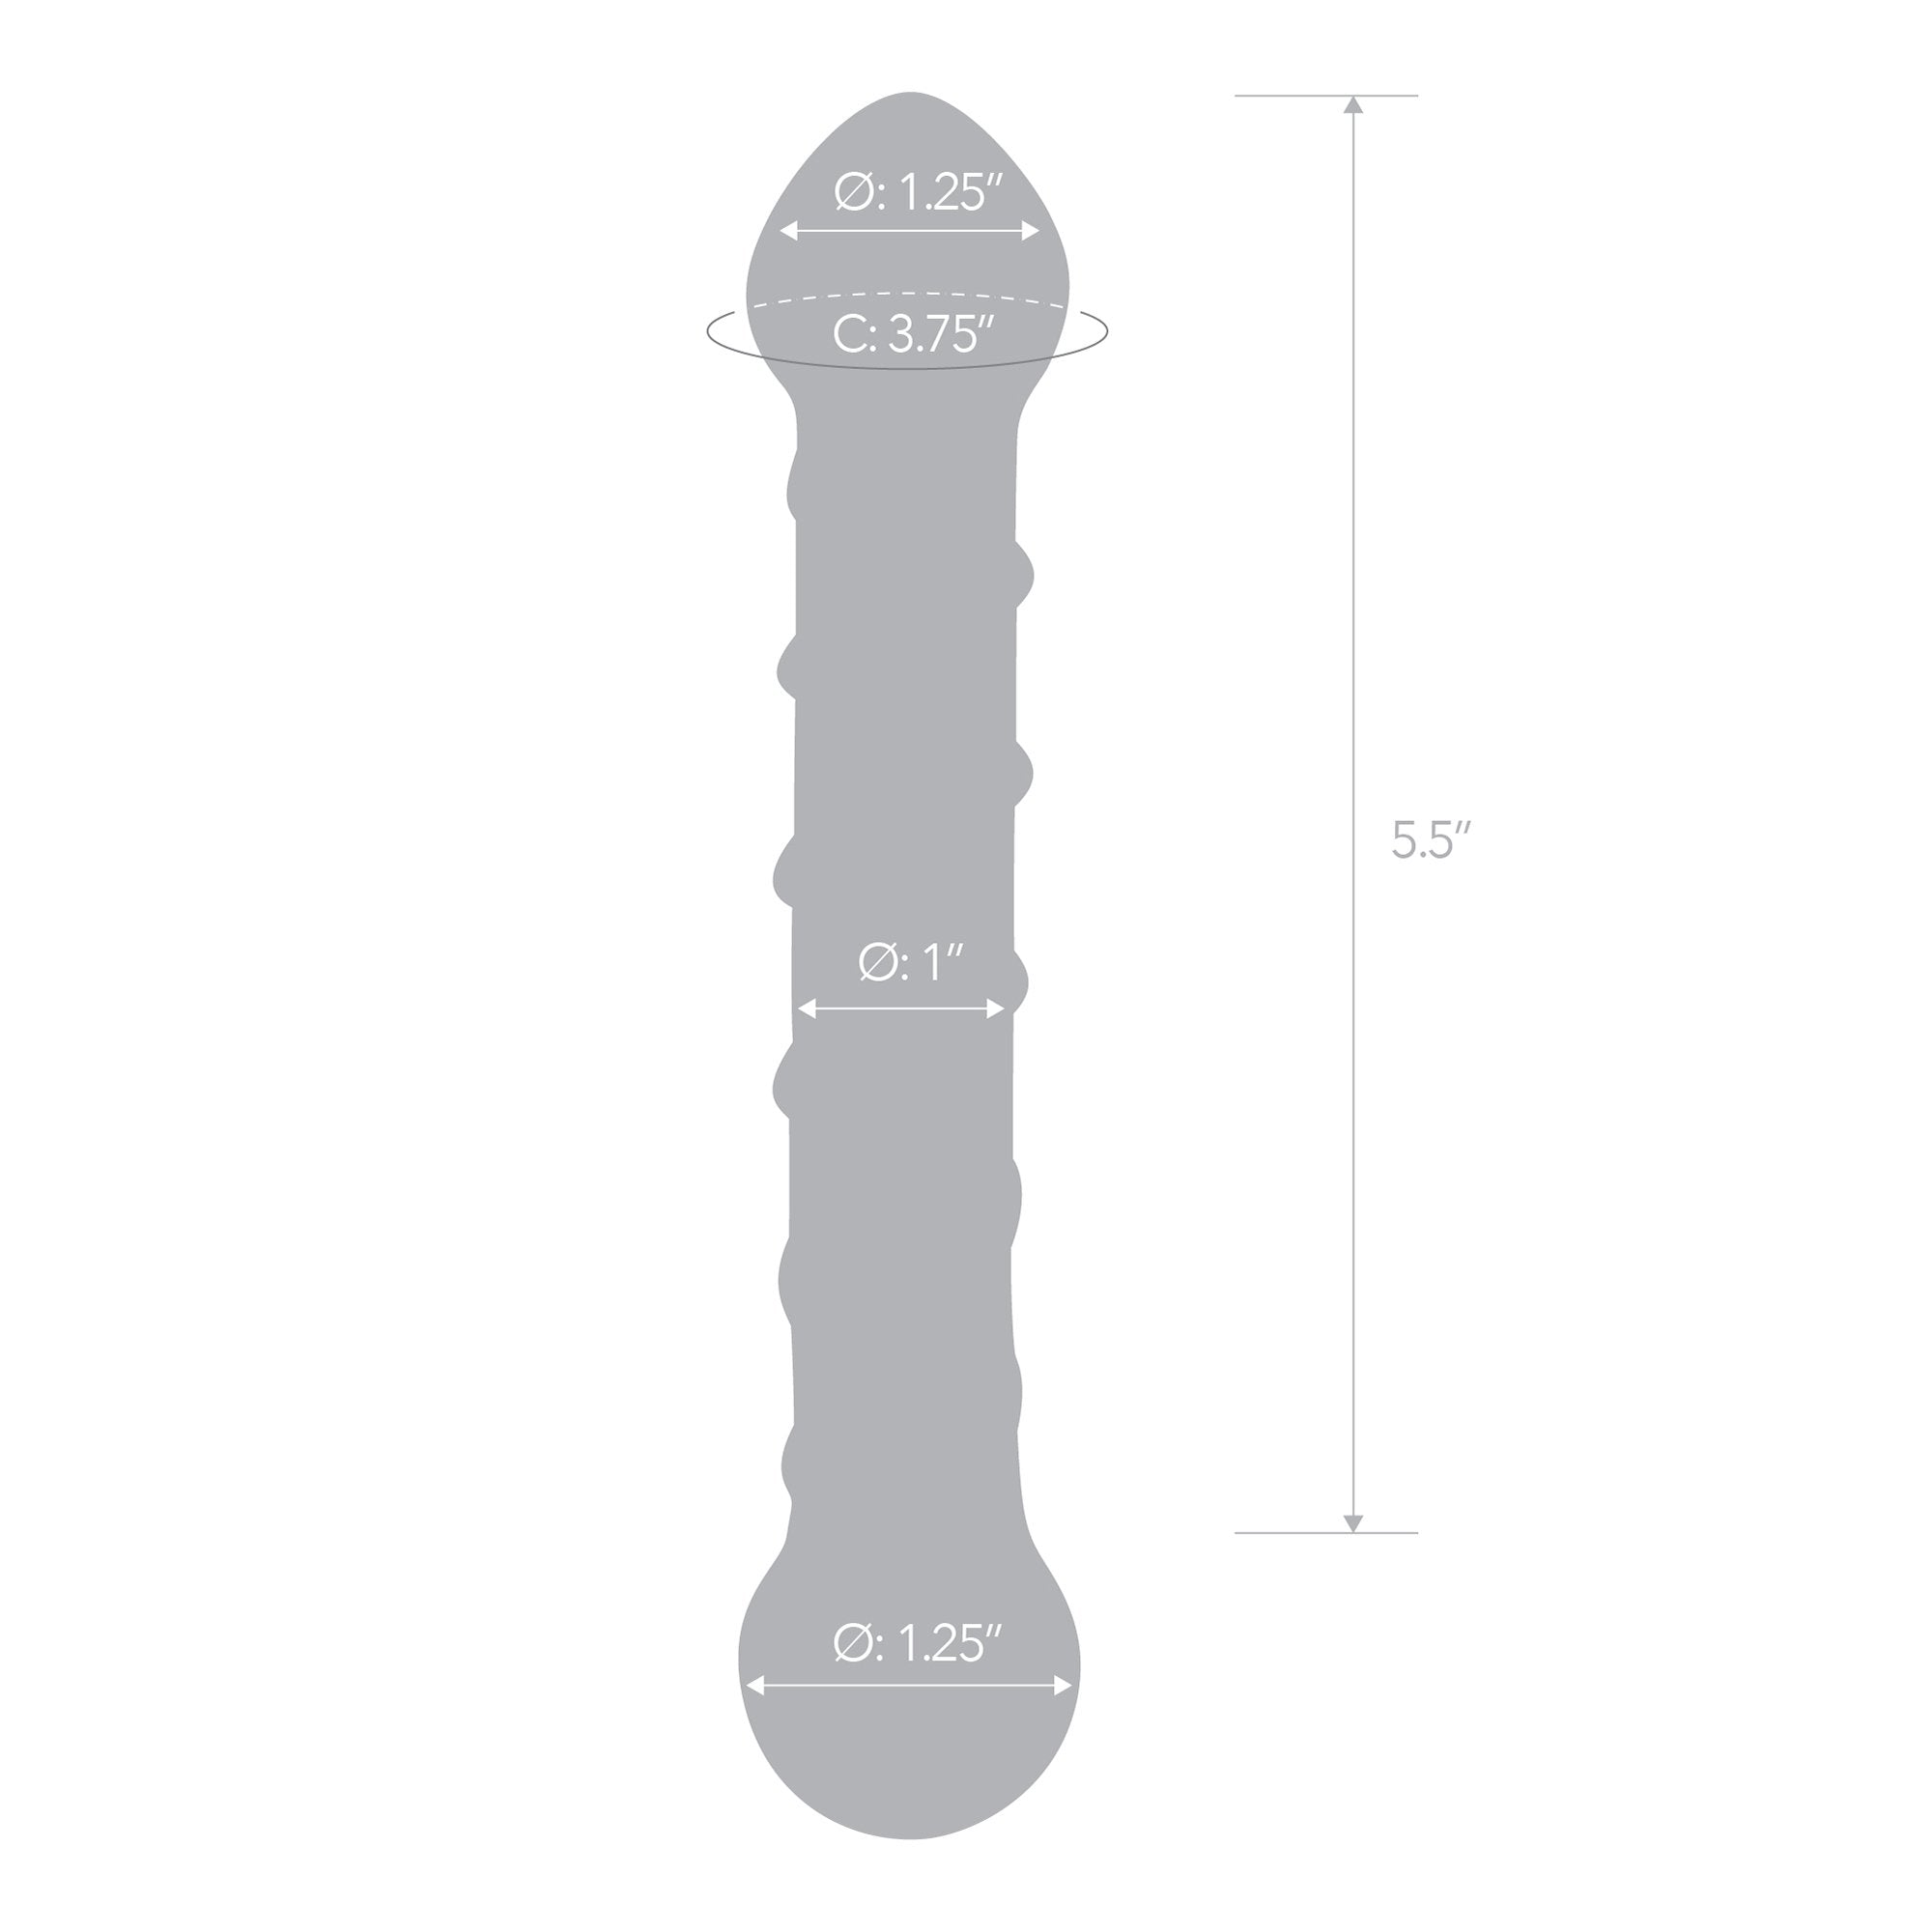 Specifications of the Gläs 6.5 inch Spiral Glass Dildo